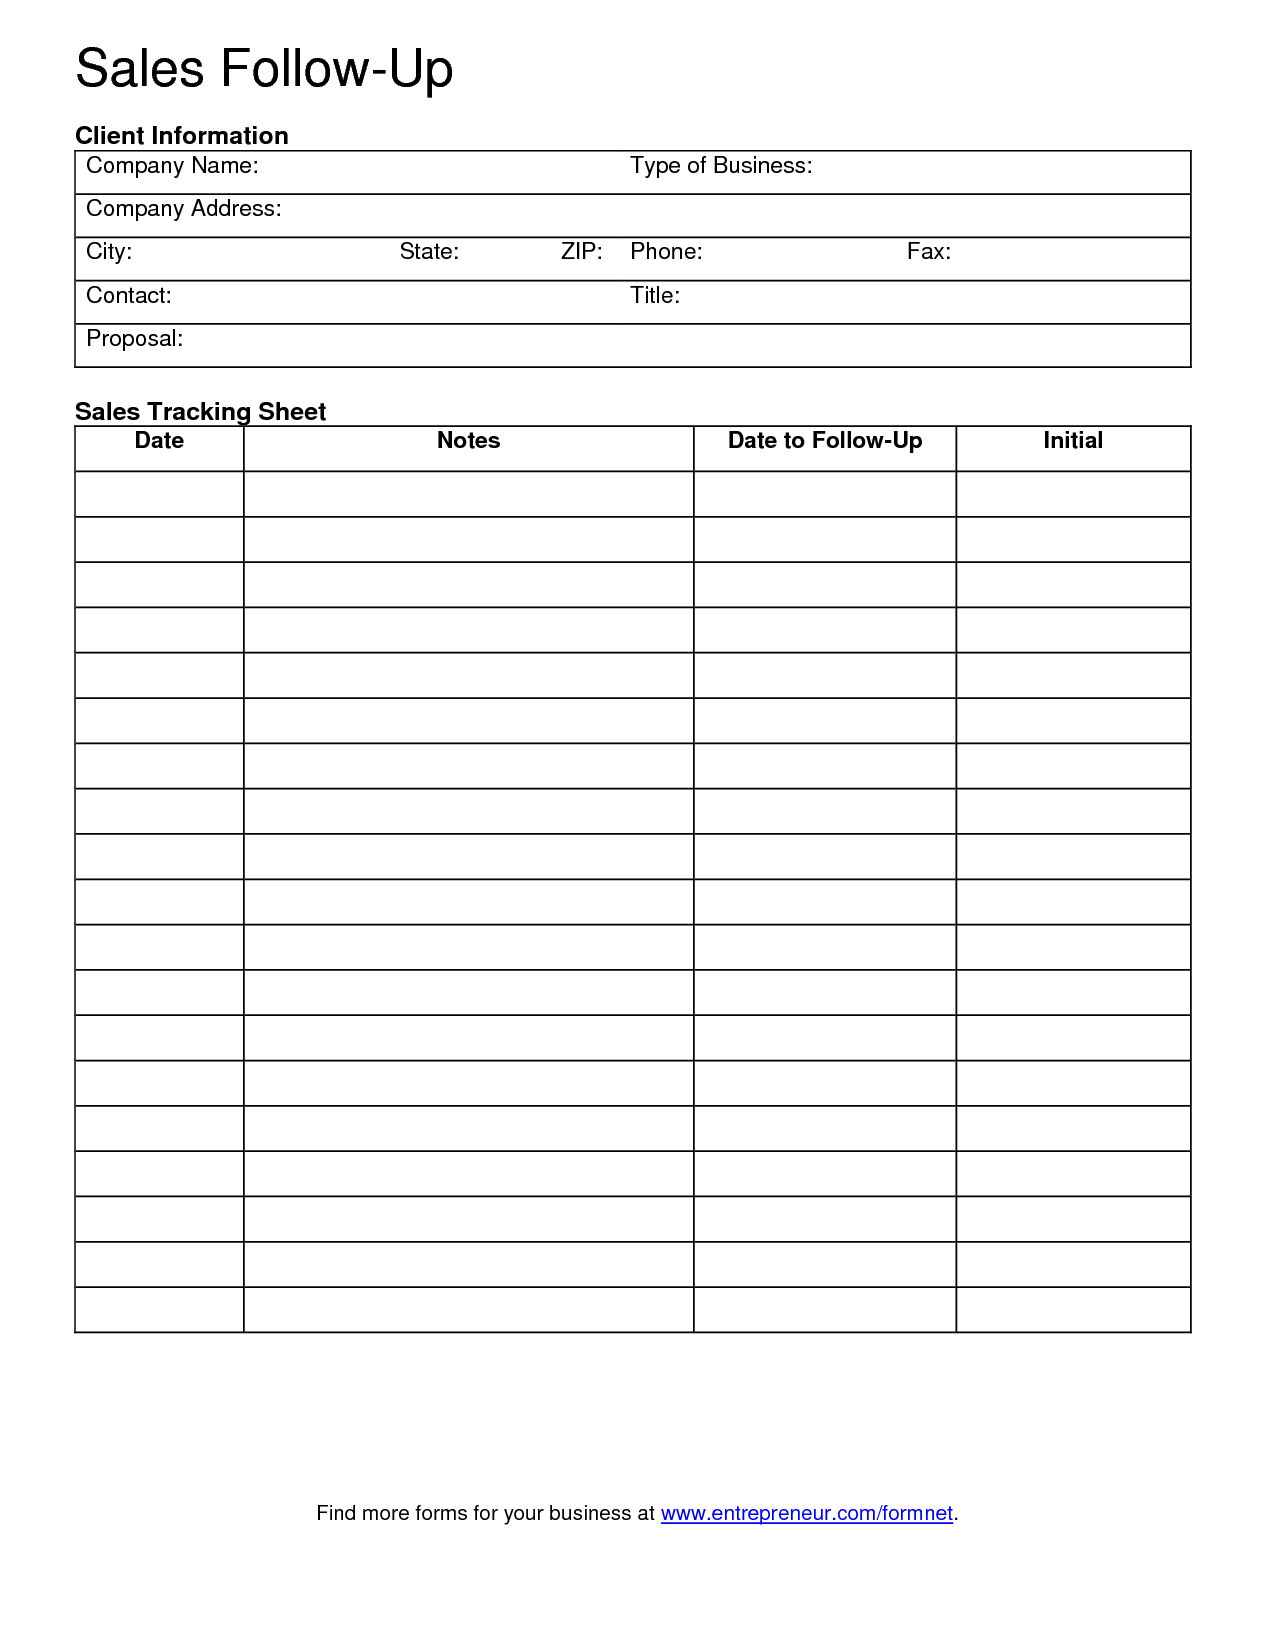 Free Client Contact Sheet | Sales Follow Up Template | Cars Regarding Sales Lead Report Template